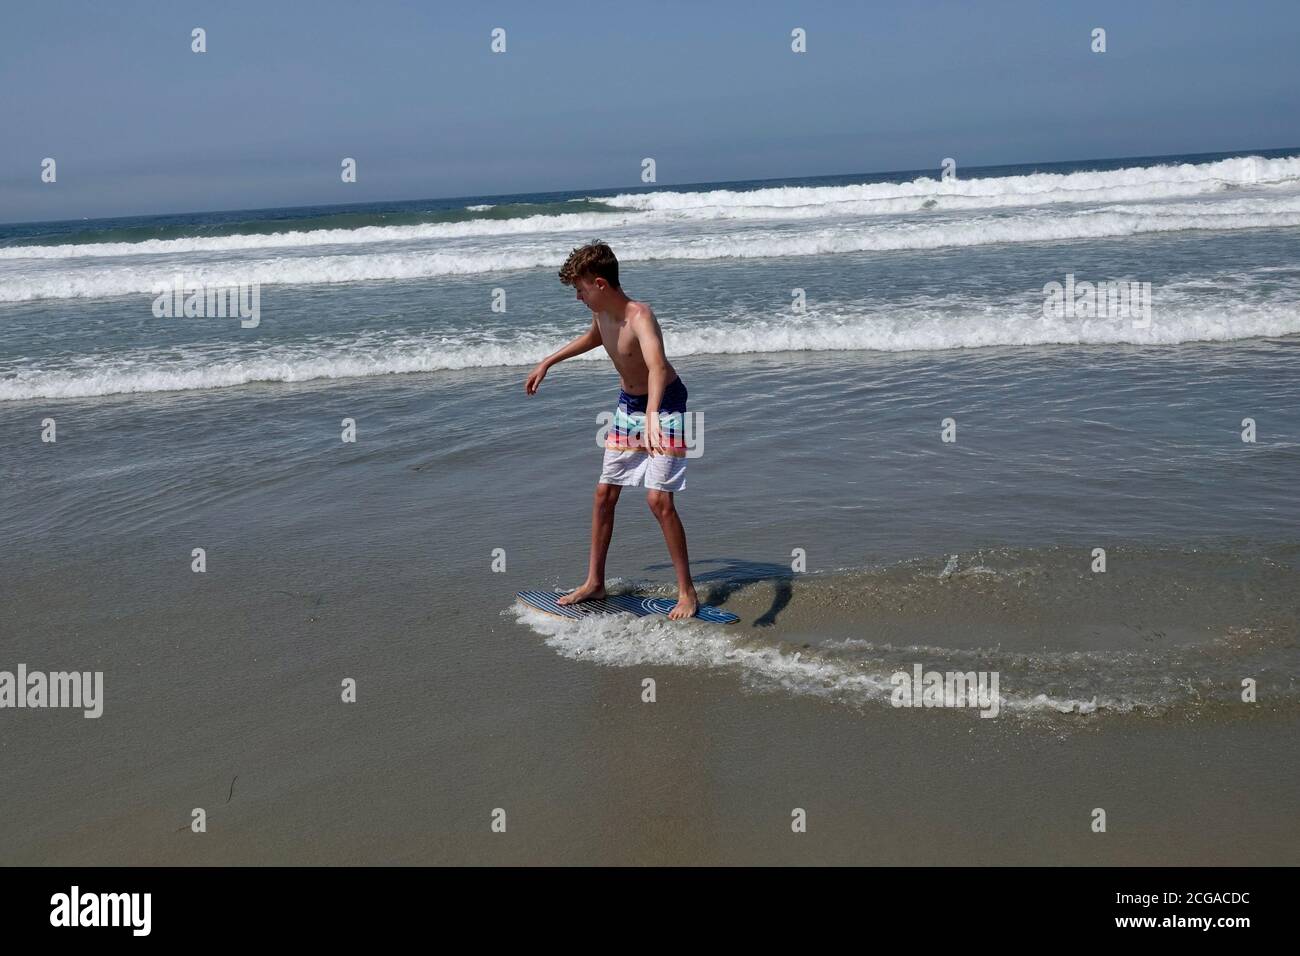 A teenage boy goes skim boarding on the waves closest to the beach shoreline. Stock Photo